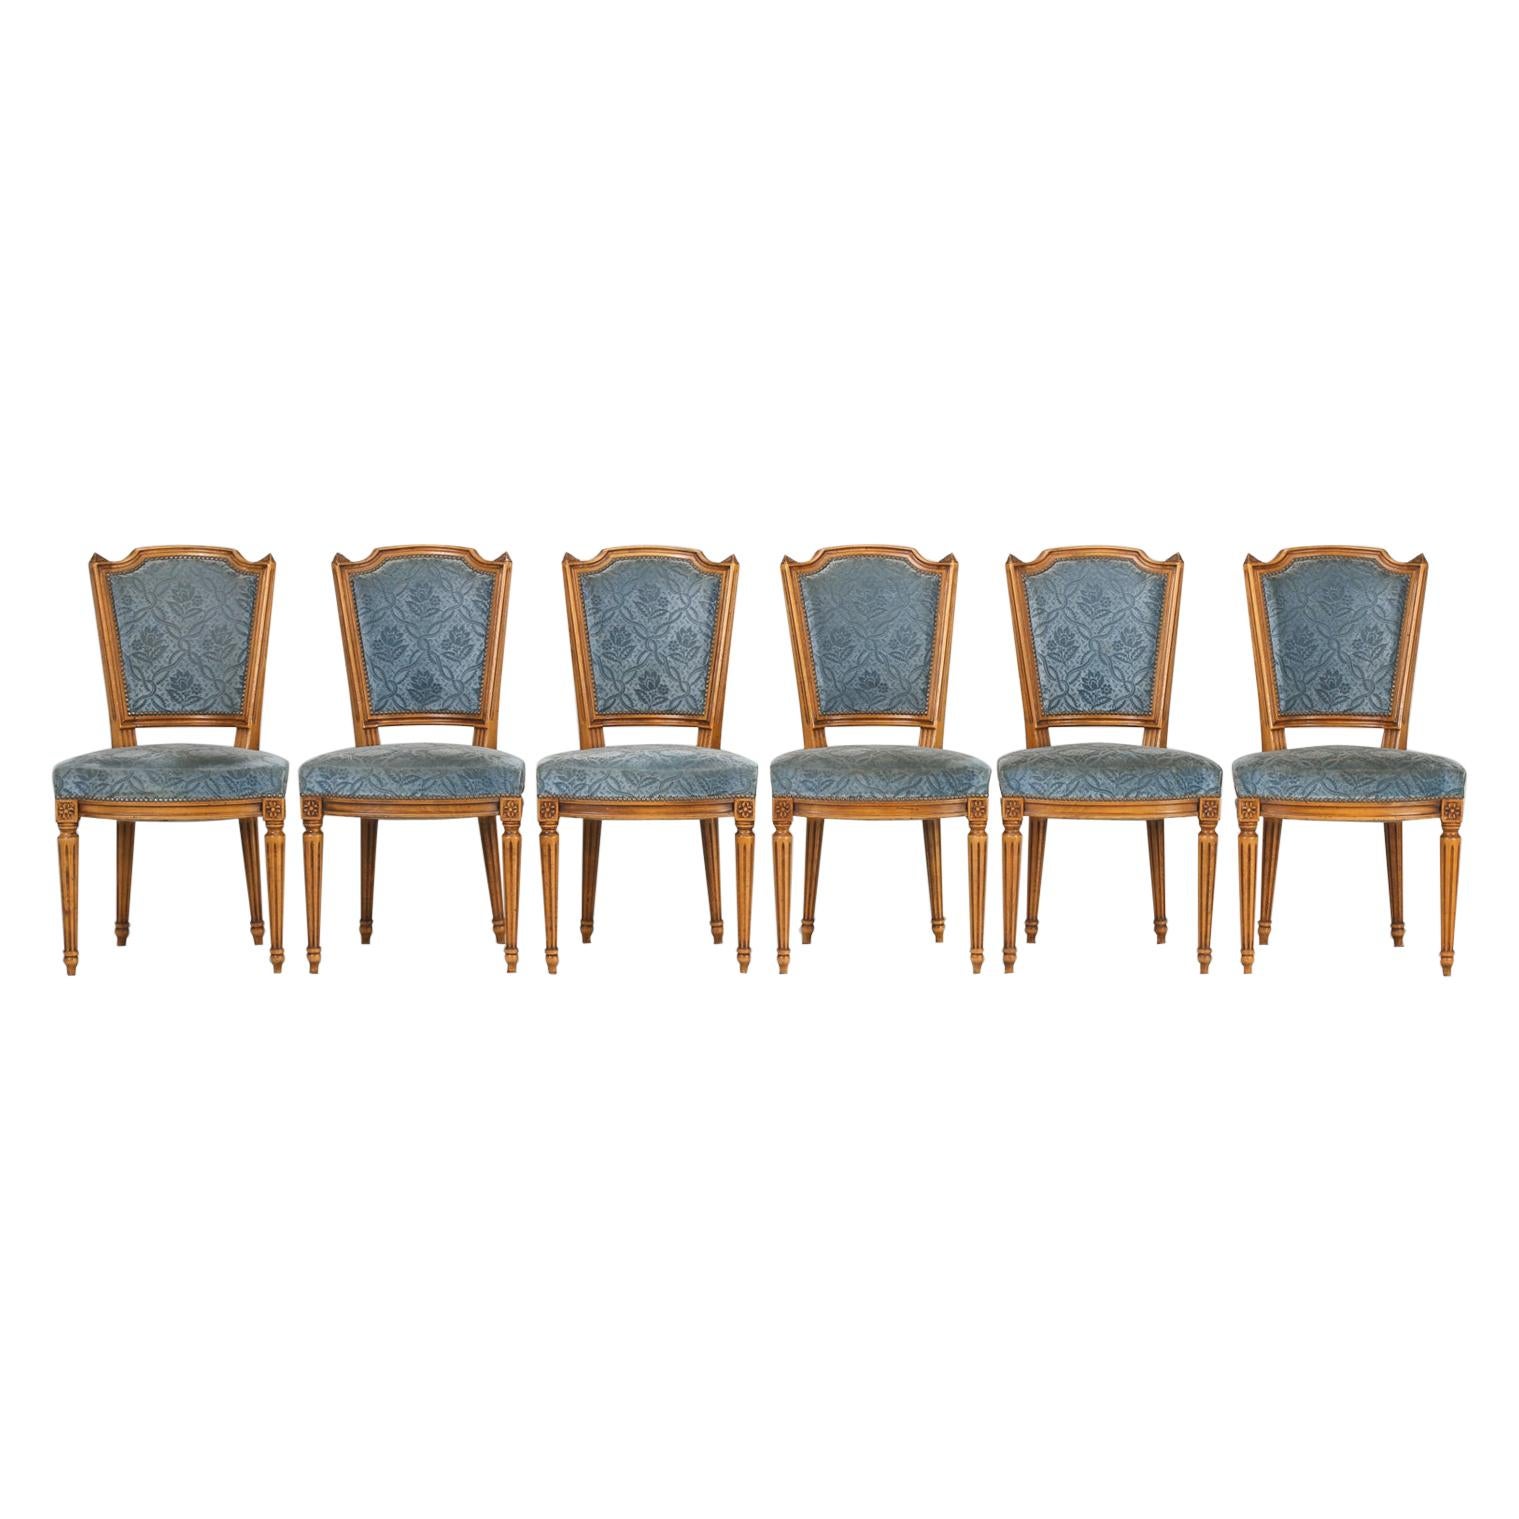 Vintage Set of Six Louis XVI Style Dining Side Chairs in Old Fabric